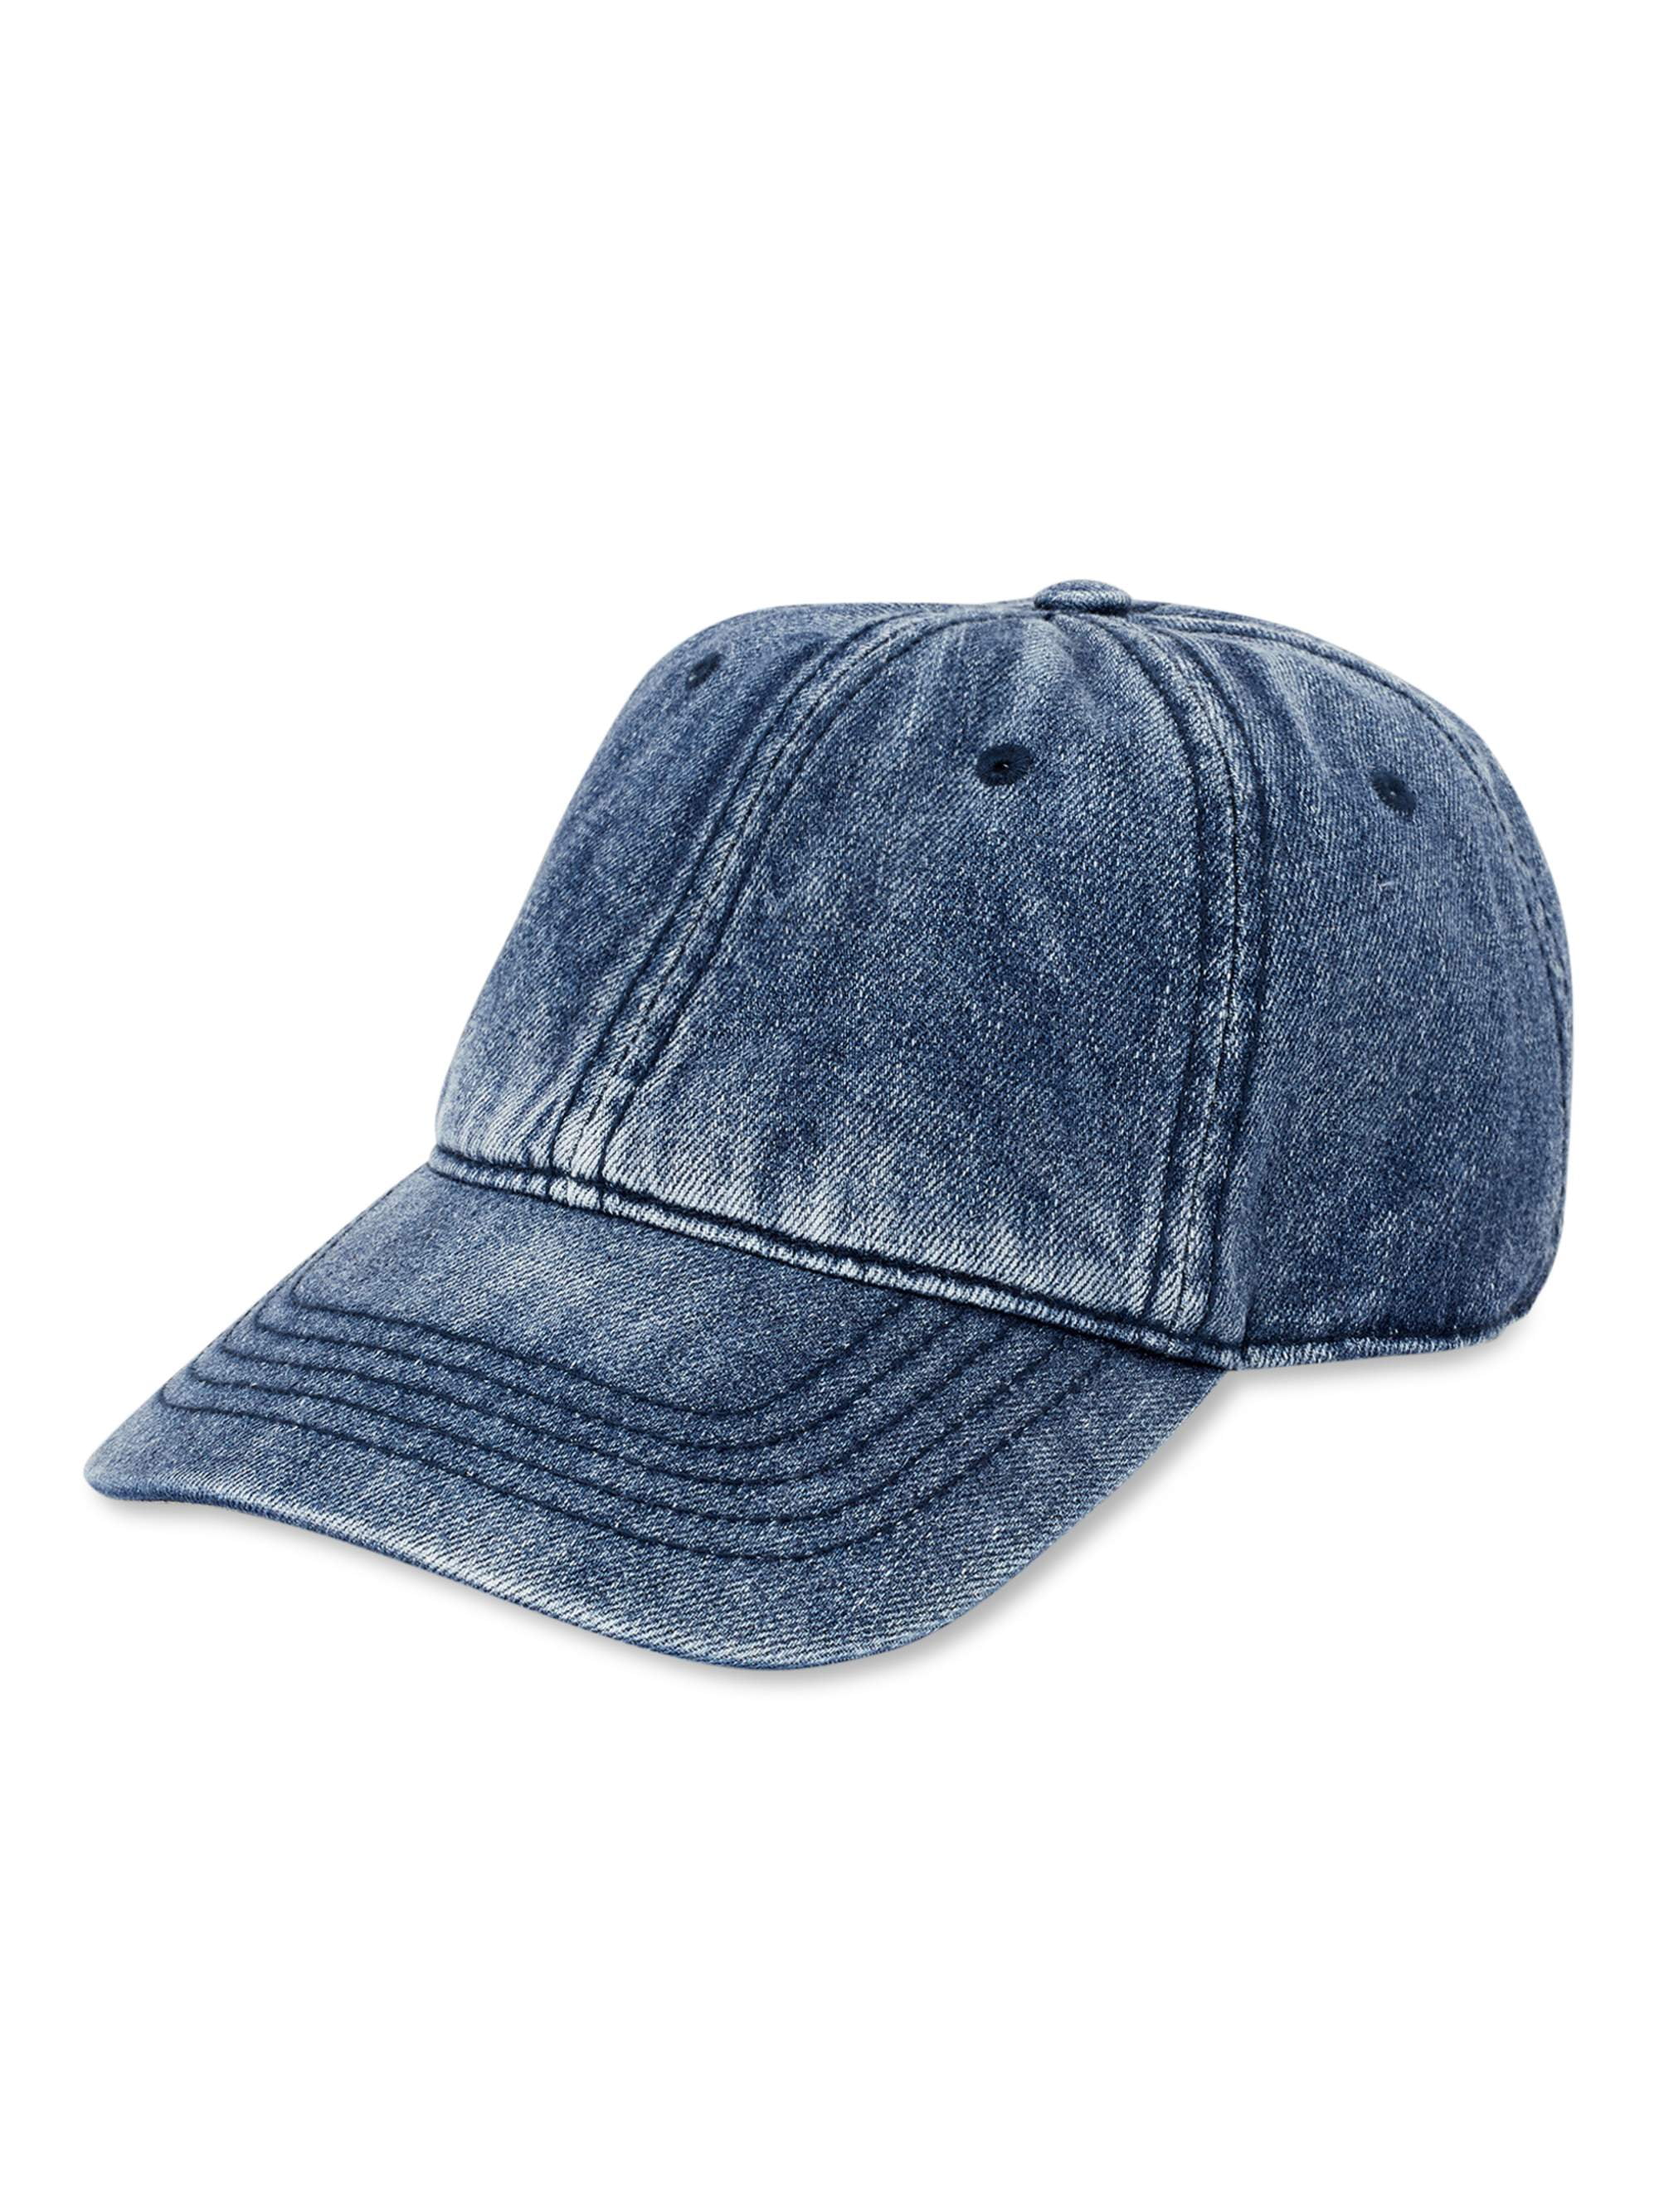 Tru Denim Cotton Time Blue Women\'s and Hat, Washed Twill Baseball